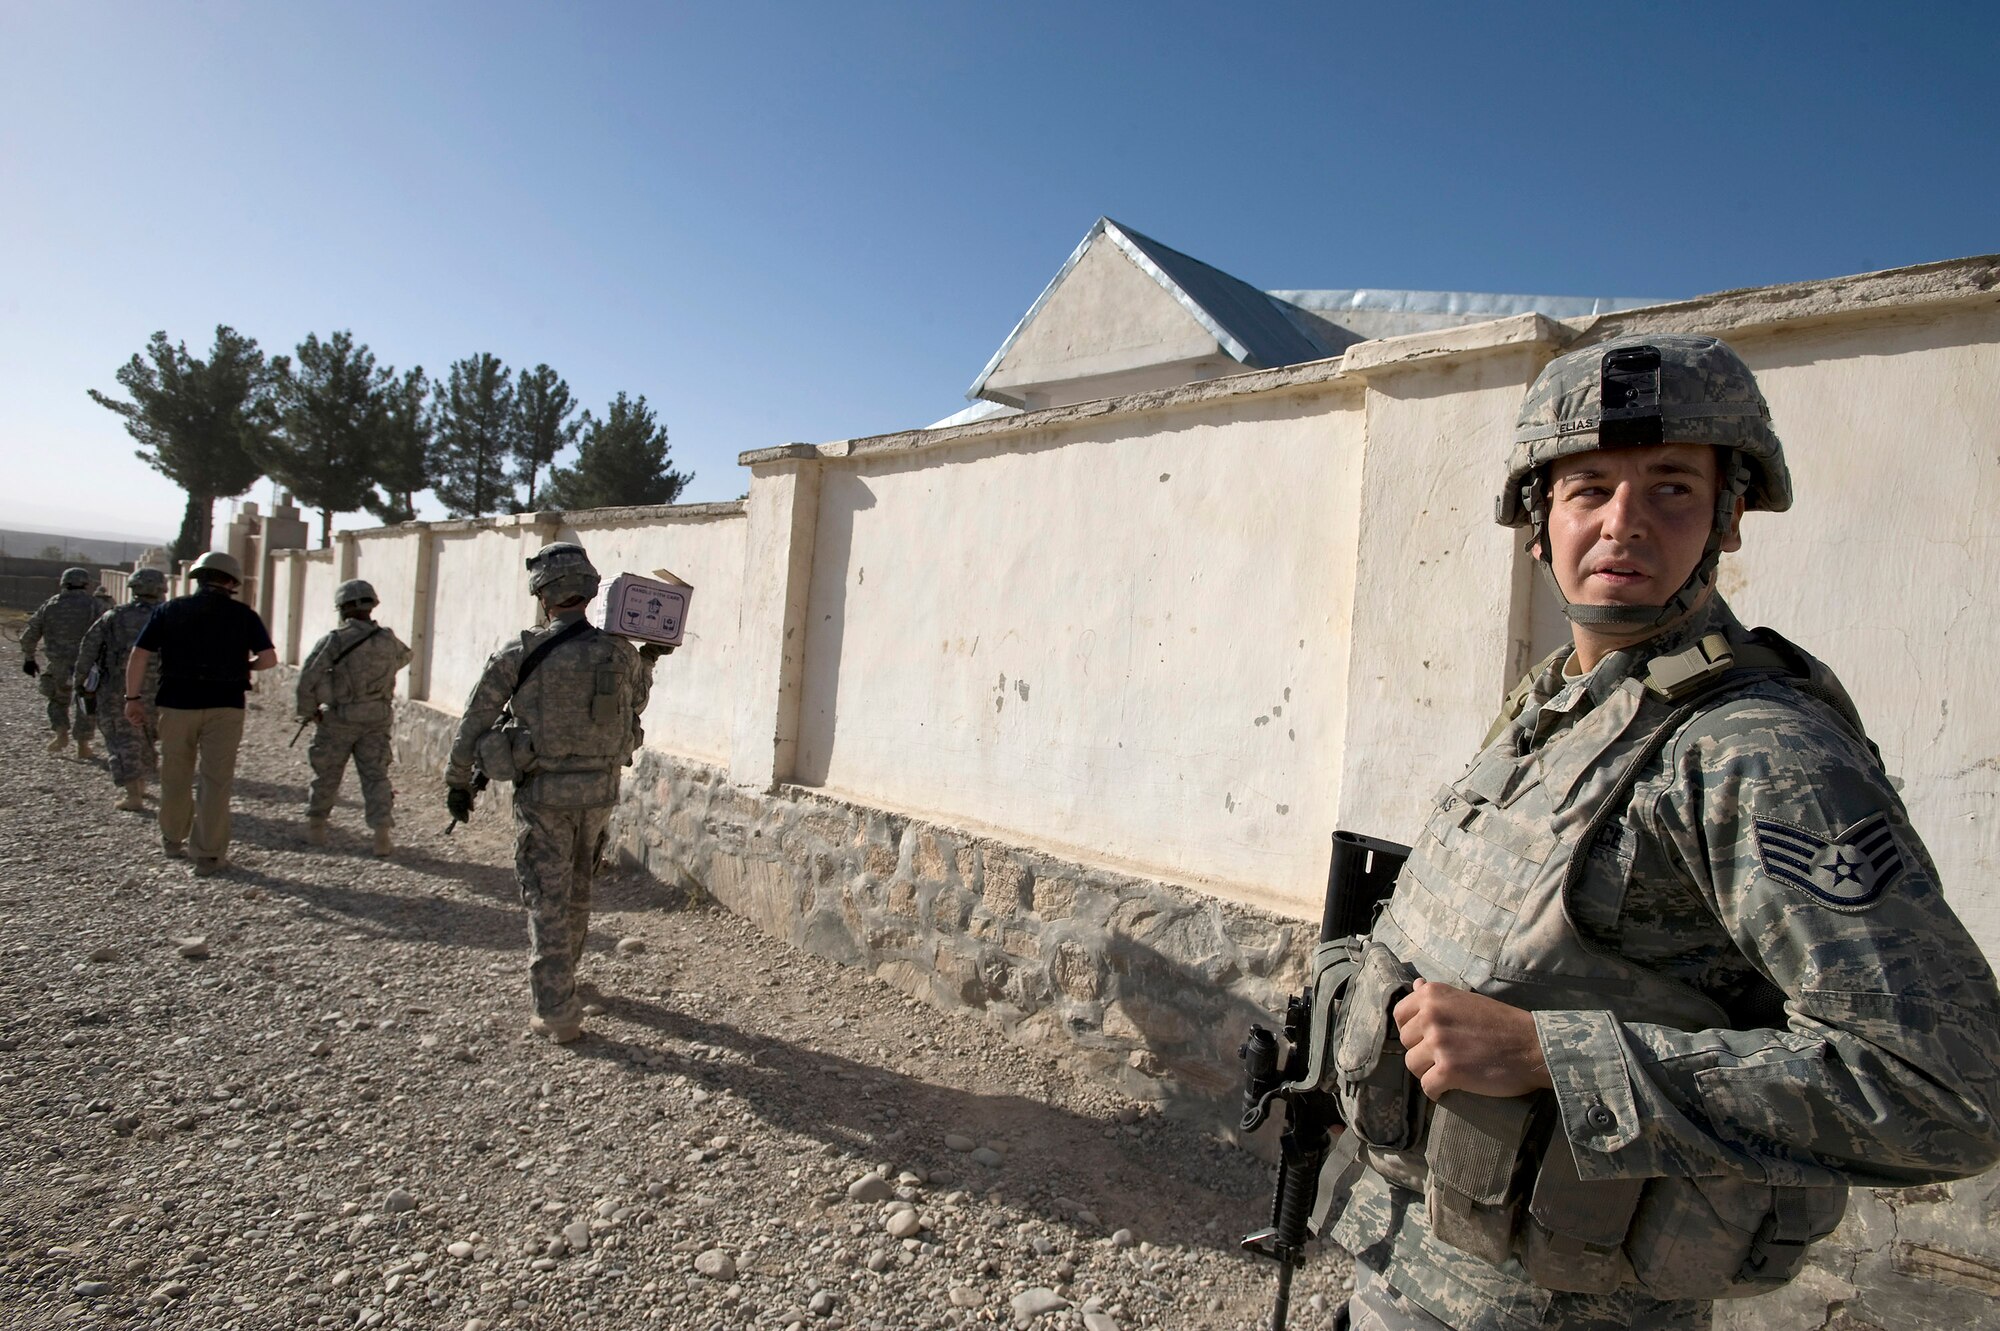 Staff Sgt. Don Elias provides security while deployed with the Zabul Provincial Reconstruction Team Oct. 18 in Qalat, Afghanistan. Sergeant Elias is deployed to the PRT as the force protection NCO in charge from Wright-Patterson Air Force Base, Ohio. He is a native of Buffalo, N.Y. (U.S. Air Force photo/Master Sgt. Keith Brown) 
